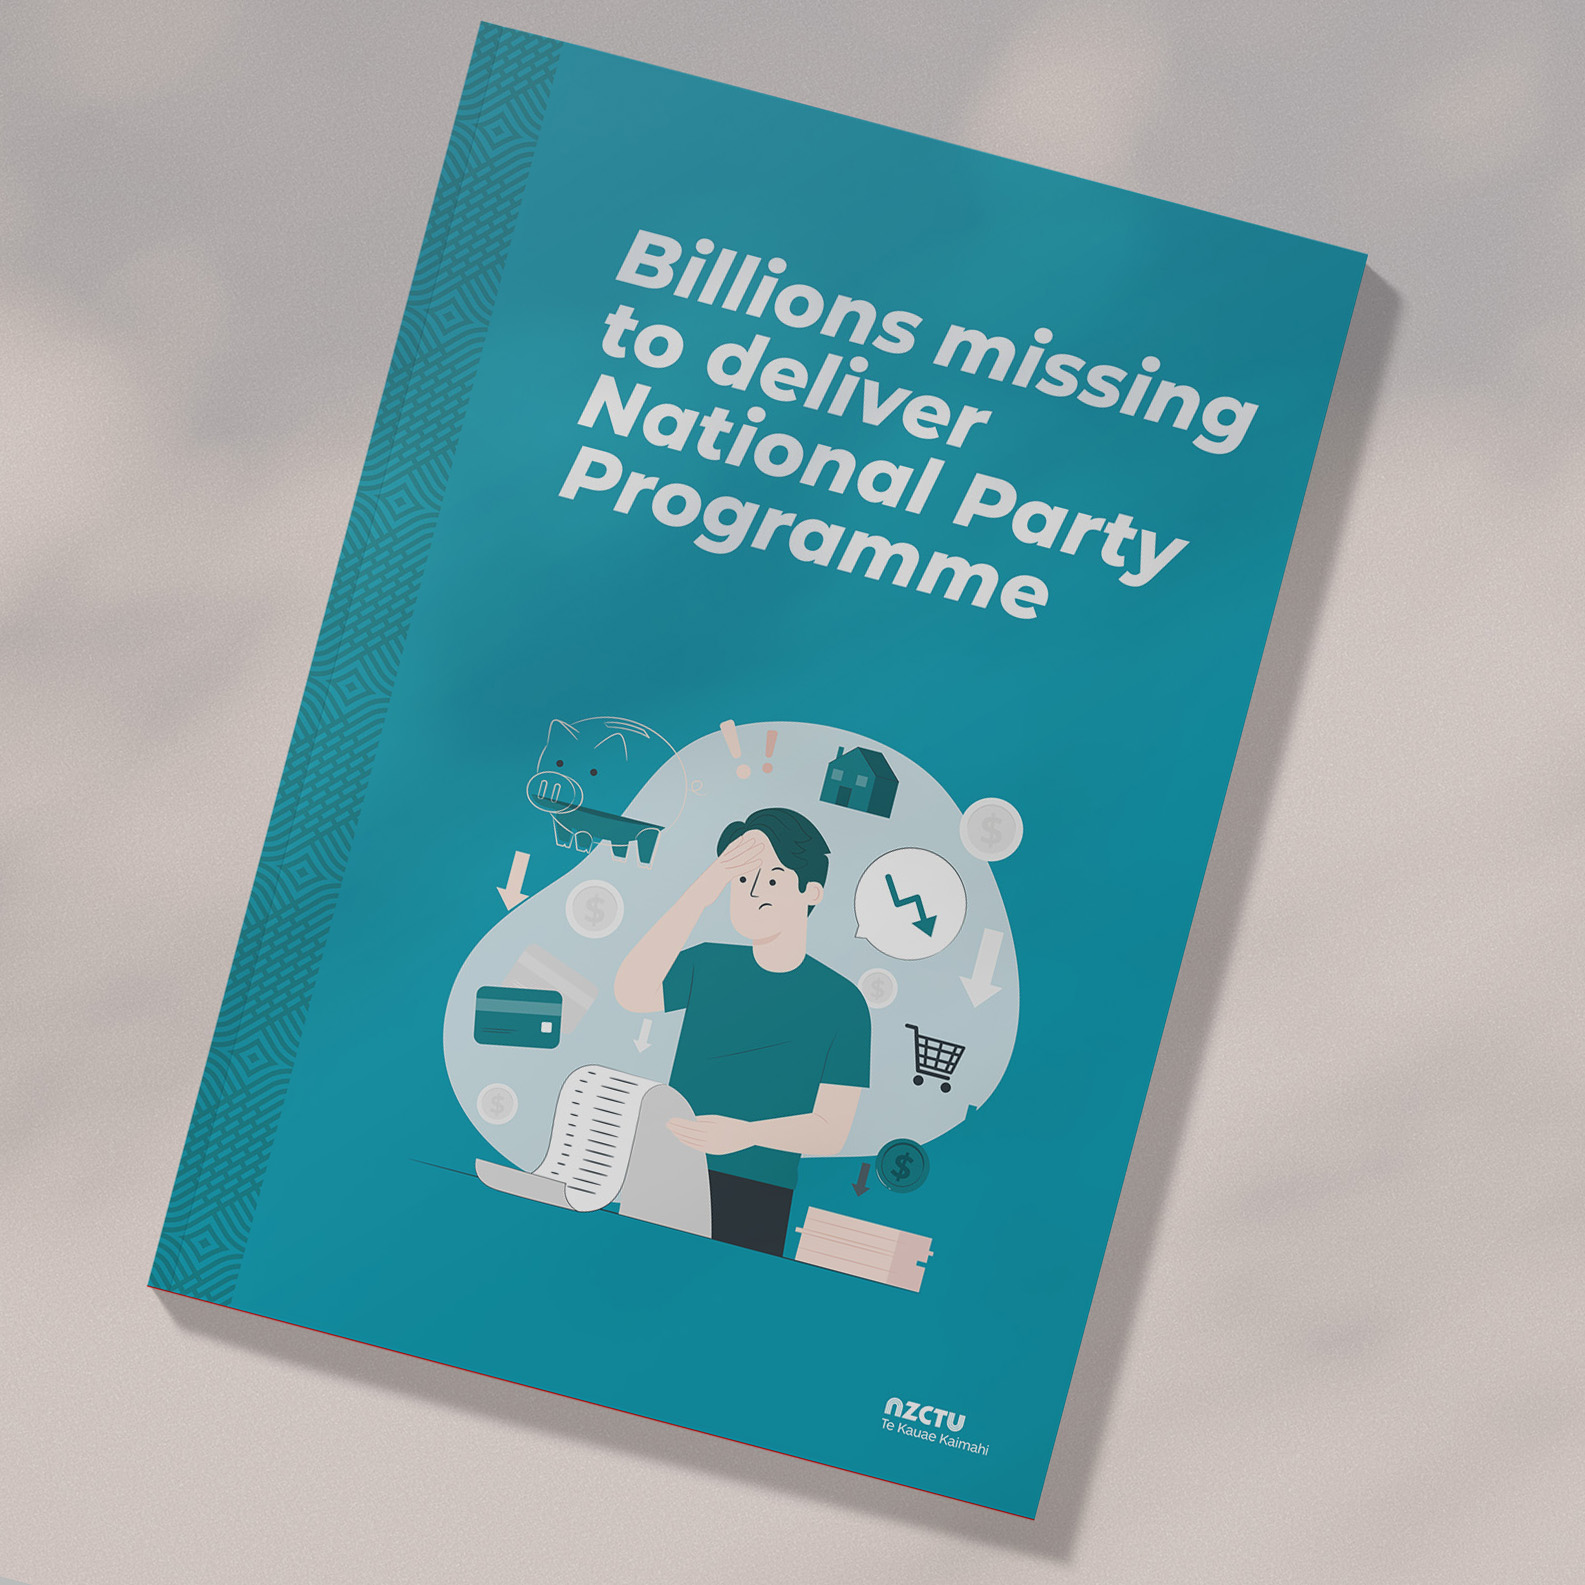 Cover of NZCTU publication "Billions missing to deliver National Party Programme"